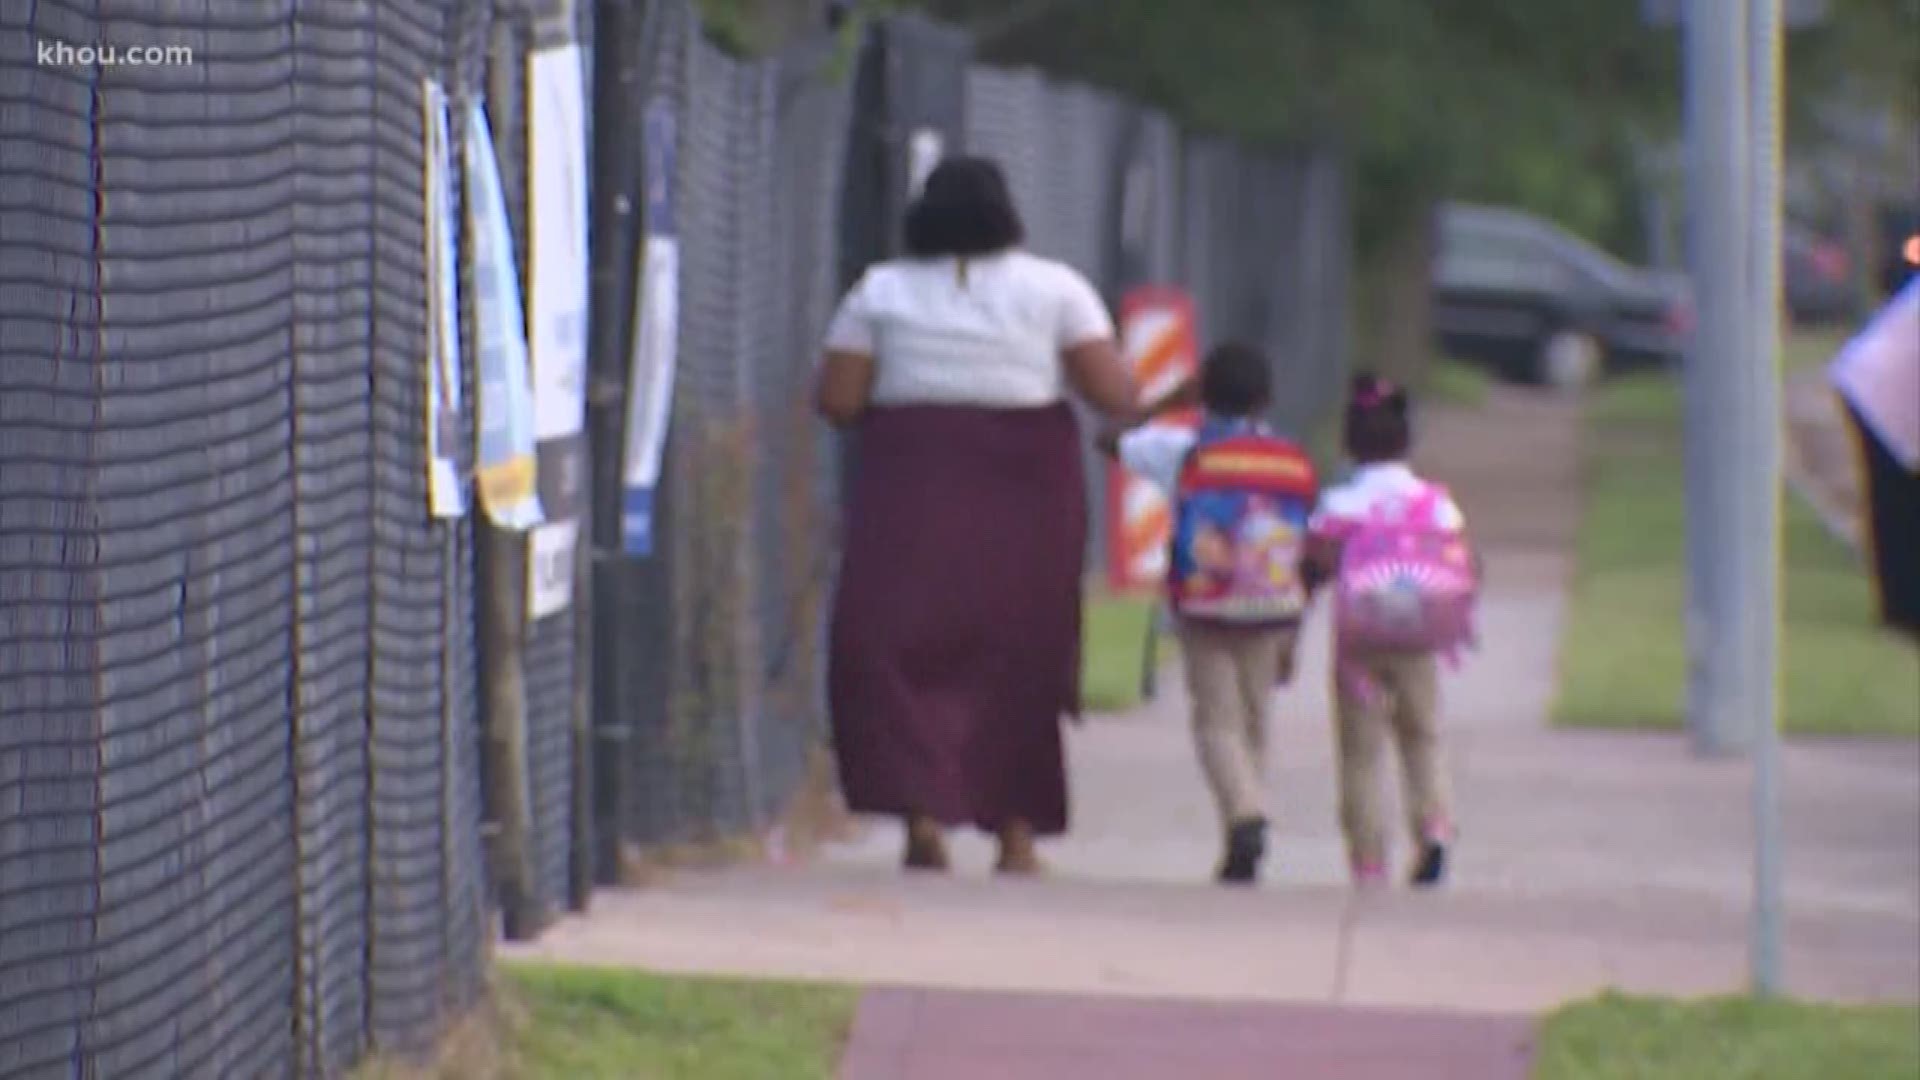 After a 4-year-old girl walked away from Law Elementary School in Houston Tuesday, parents began asking questions about how that could have happened.